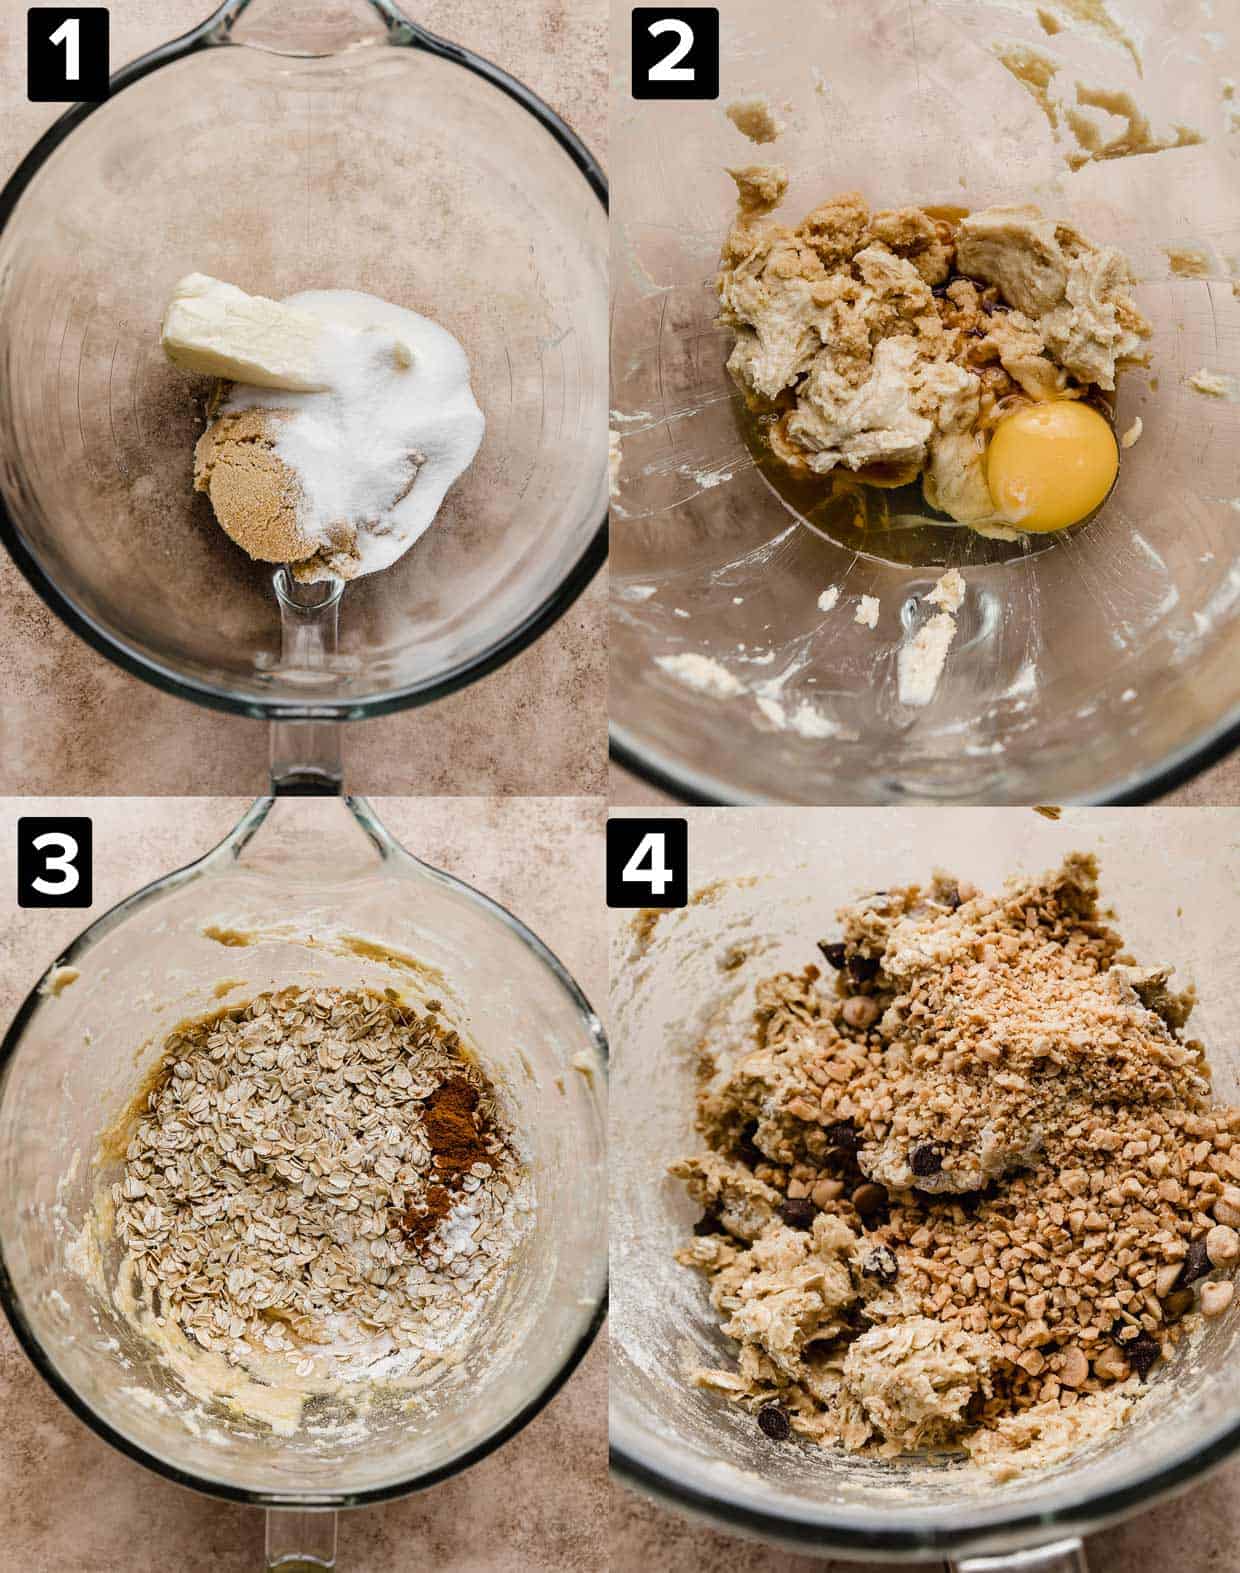 Four photos showing how to make Crumbl mom's recipe cookies, a glass bowl with cookie batter in it.